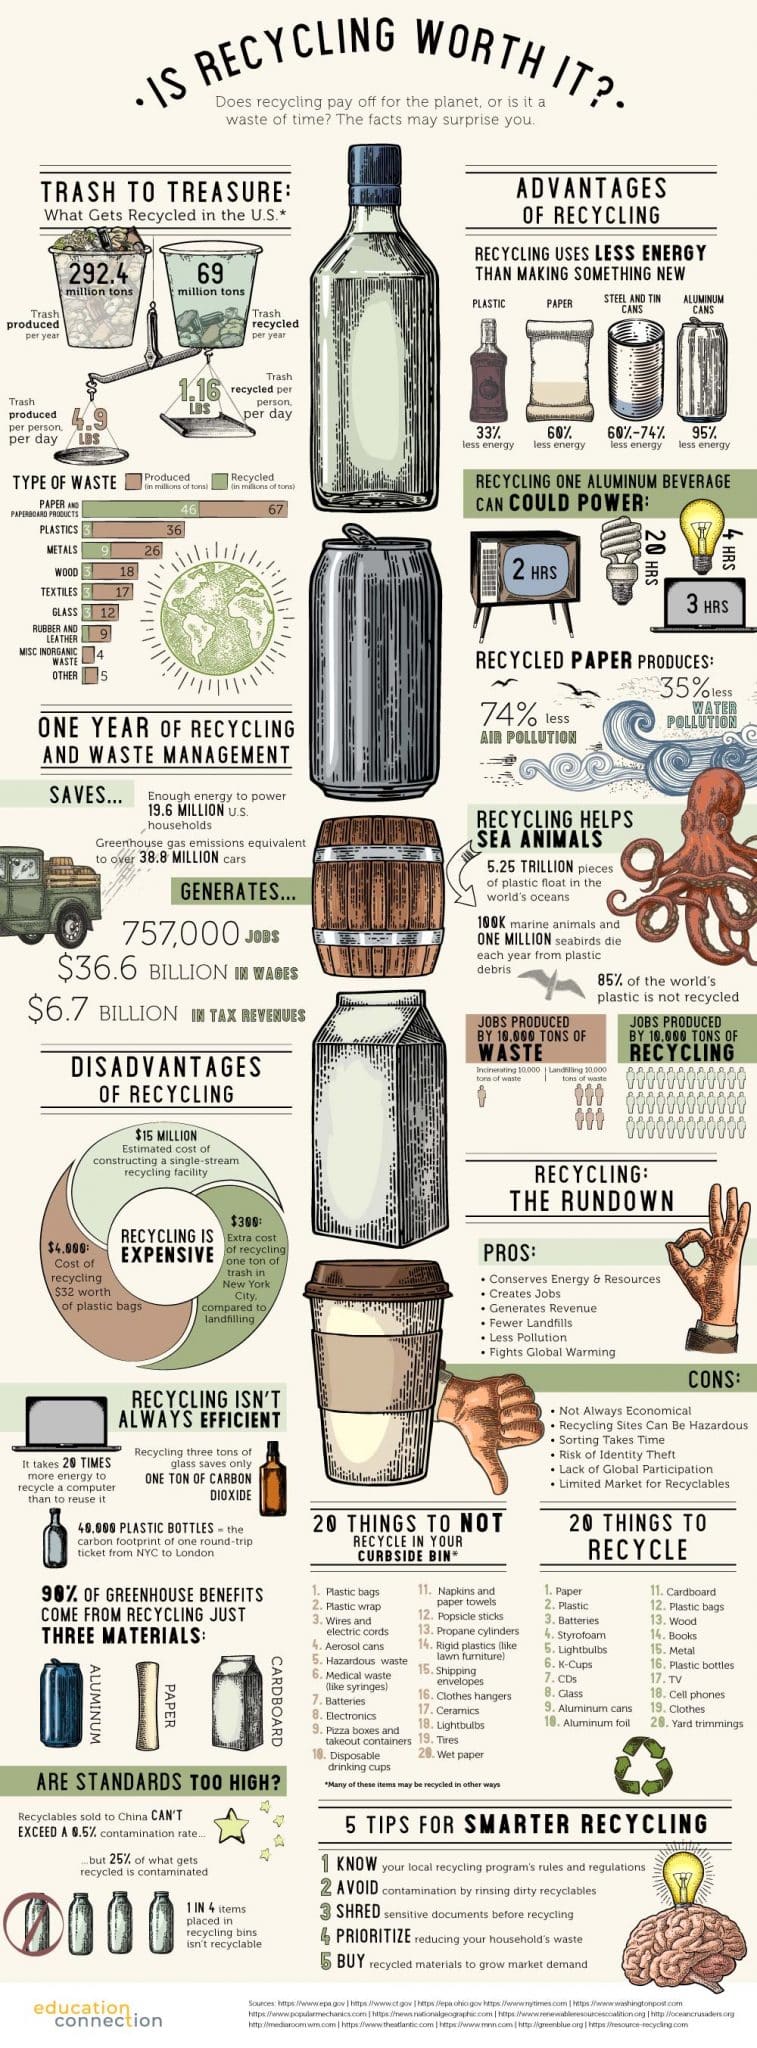 Is Recycling Worth it?